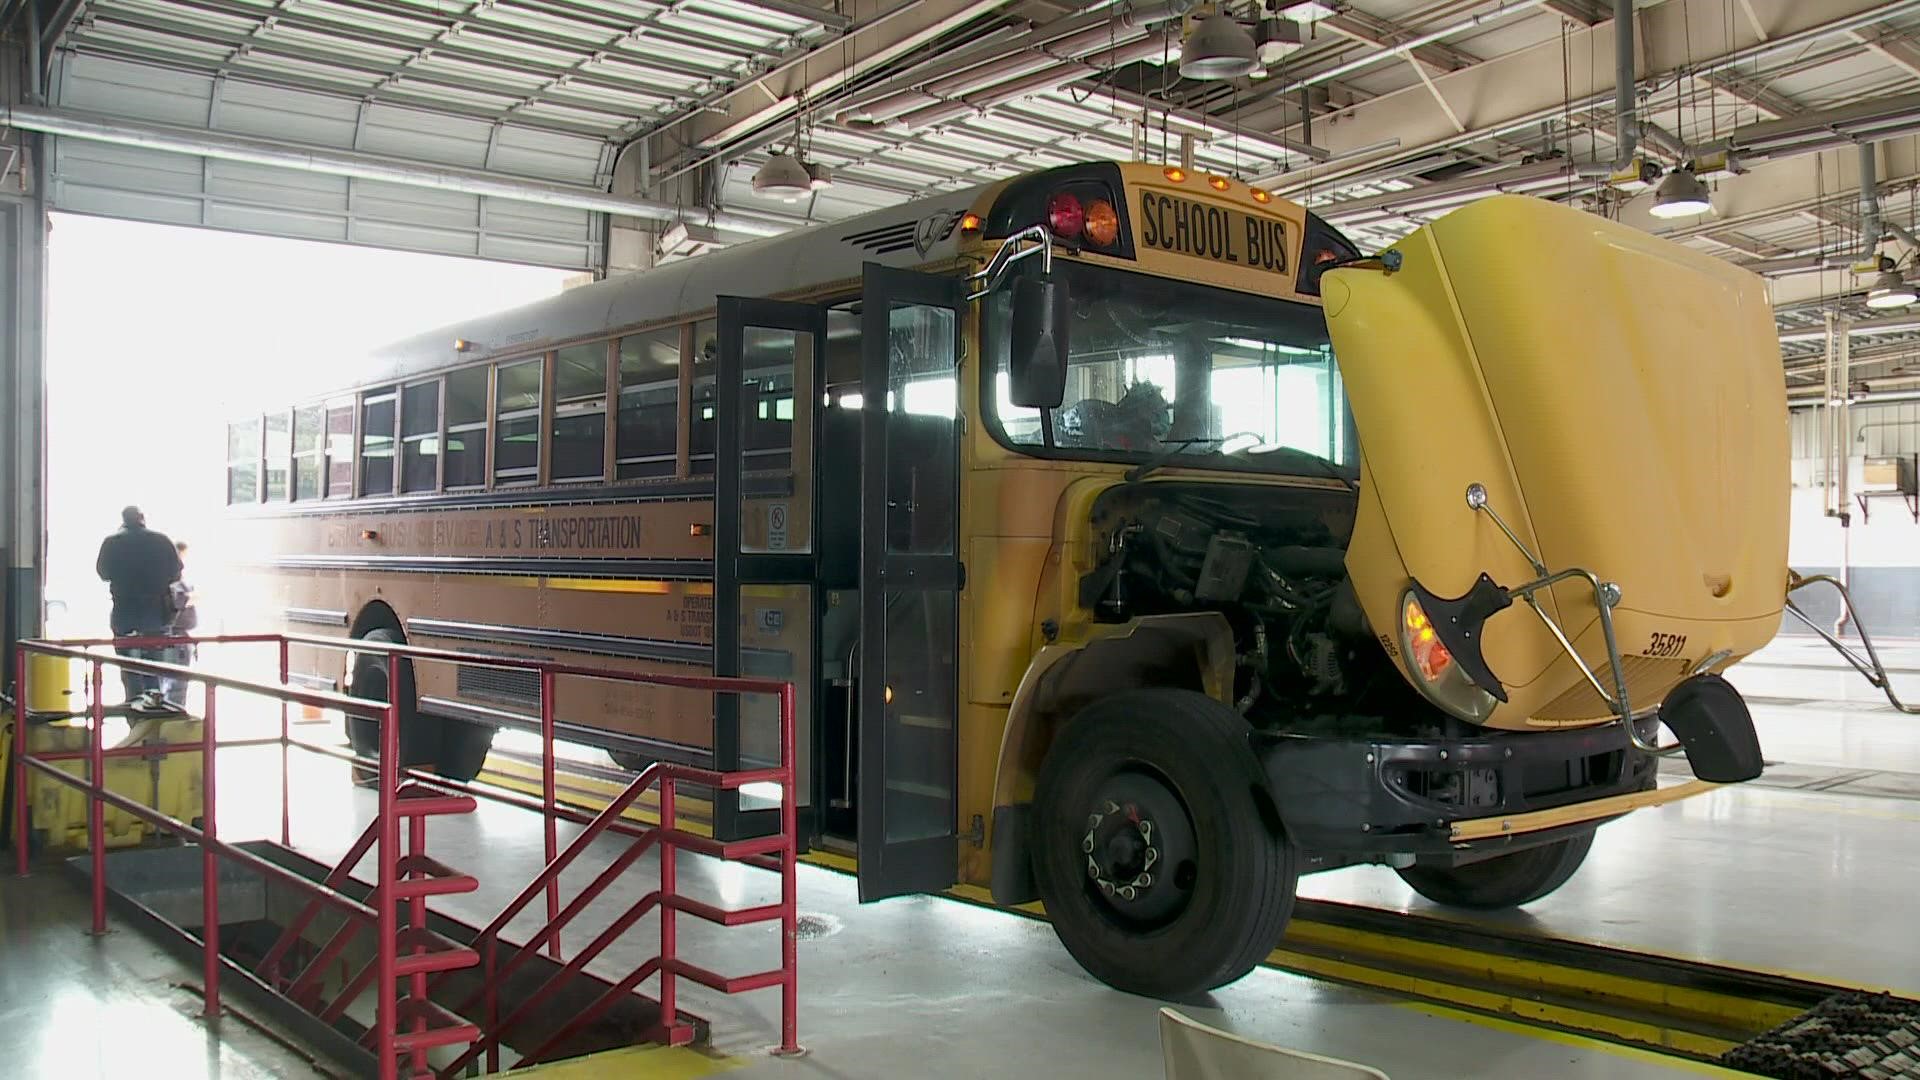 David Hammer's Taken for a Ride investigation looks at how many school buses in Orleans parish have permits ahead of the school year.